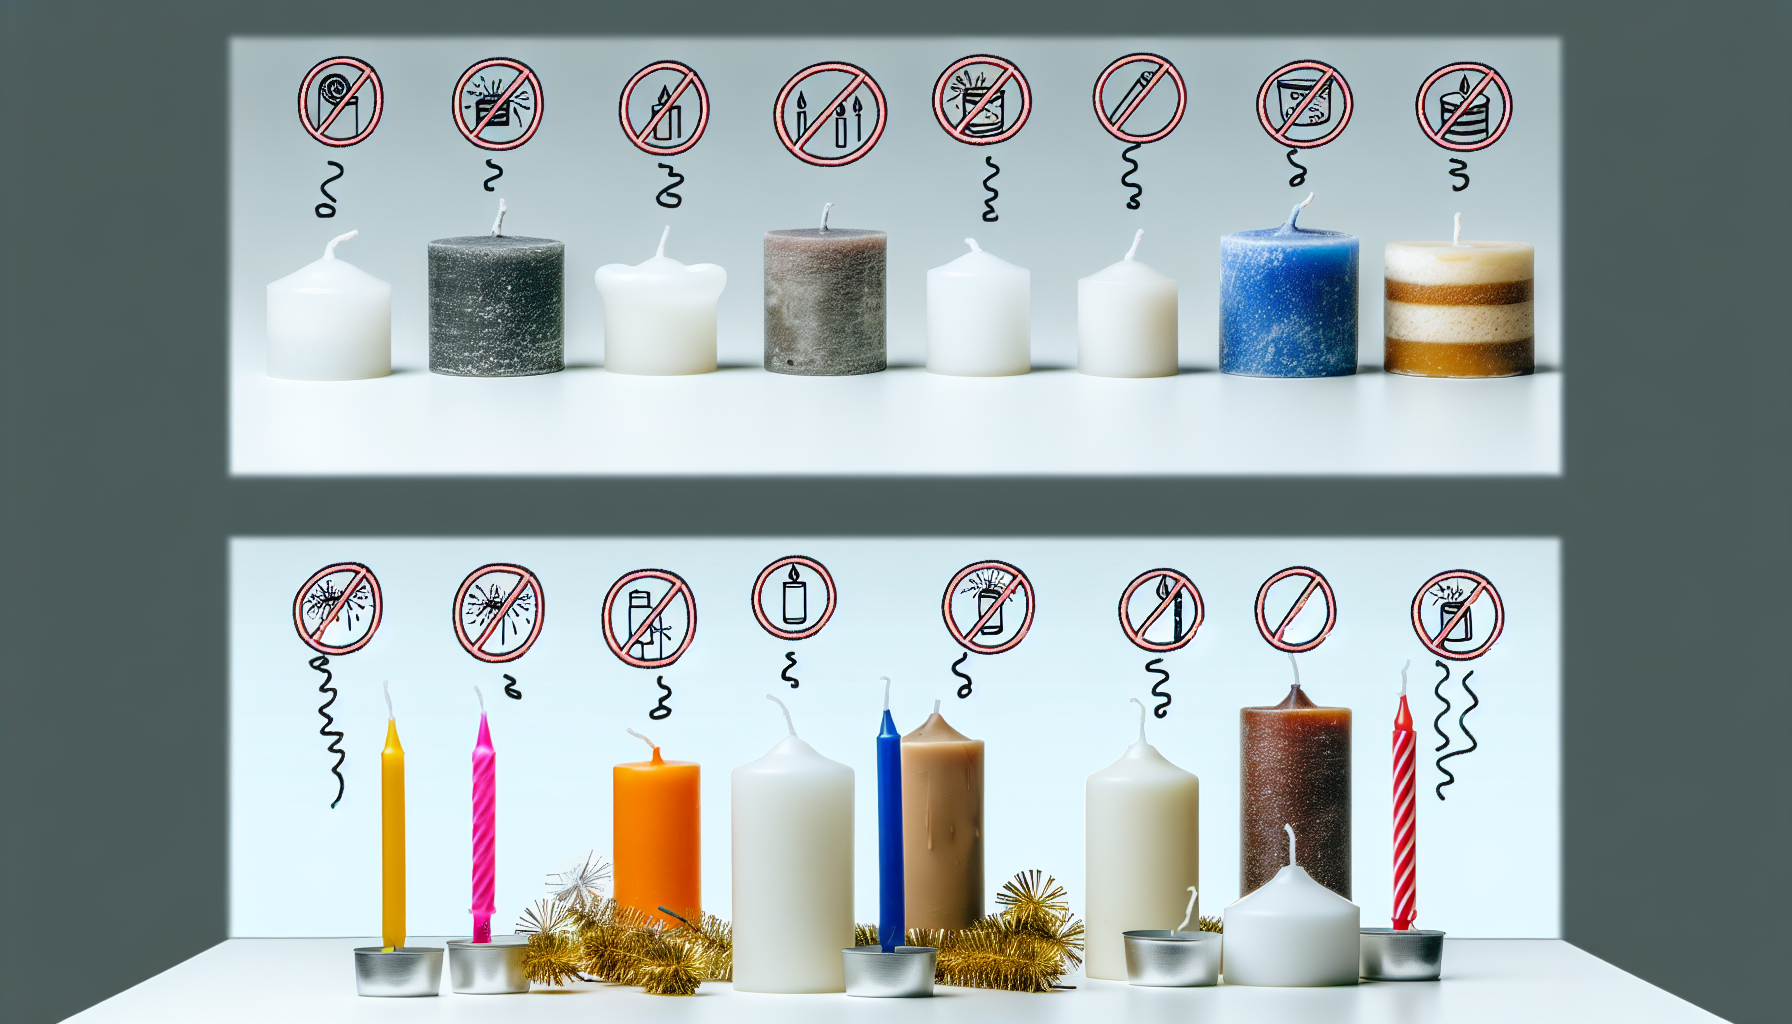 Prohibited candles